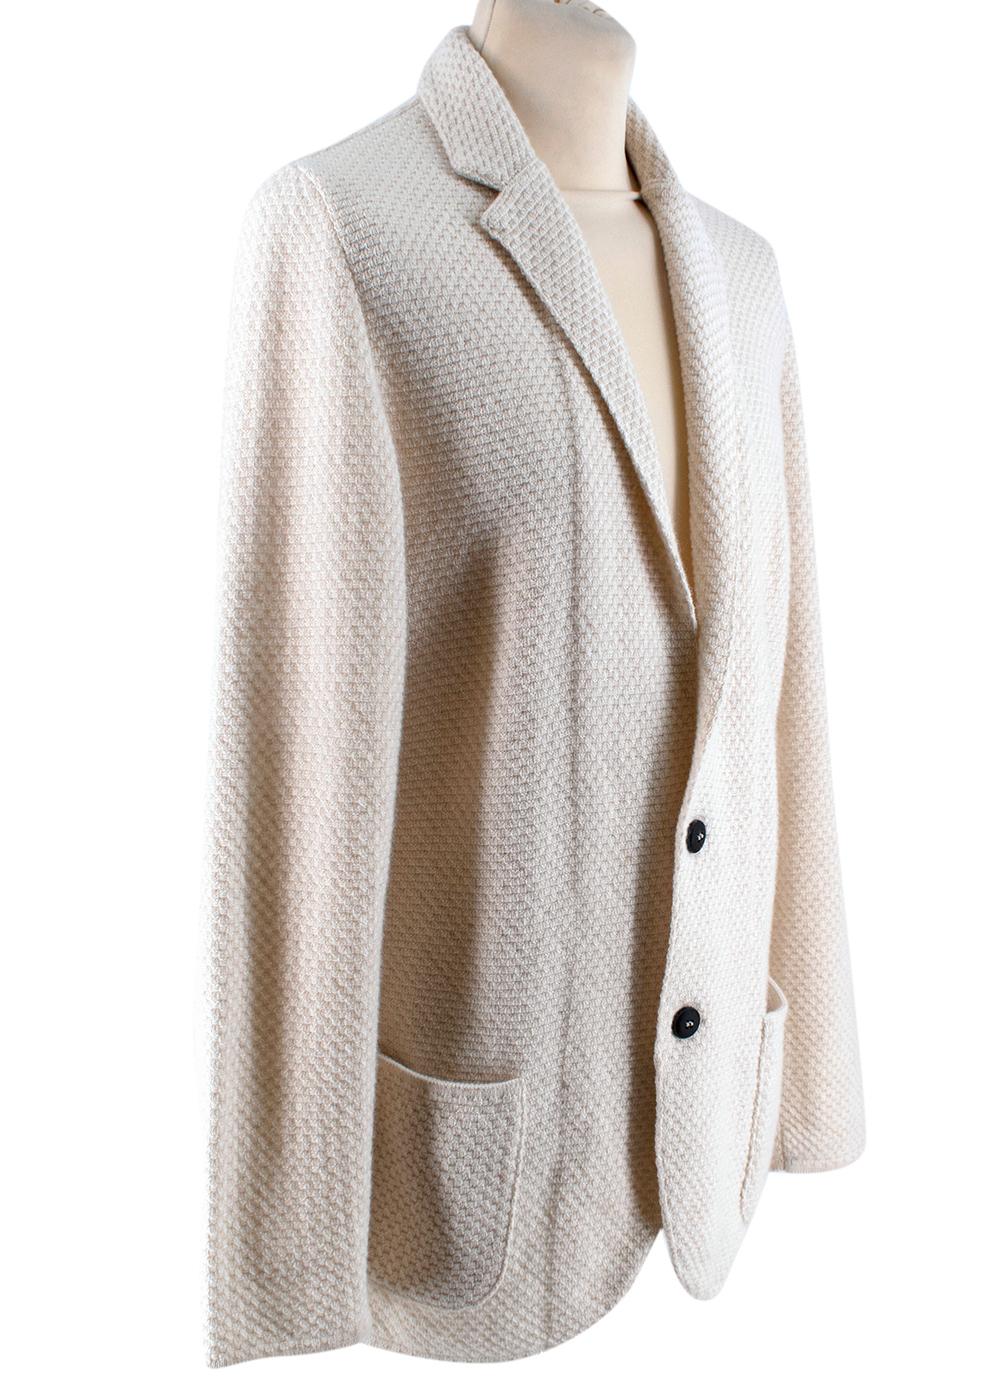 Lardini Ivory Wool & Alpaca Blend Textured Knit Blazer Jacket

- Soft wool and alpaca blend 
- Classic single breasted cut 
- Textured knit surface 
- Pockets to the front 
- Neutral ivory hue 
- Button fastening to the front 
- Easy to style 
-